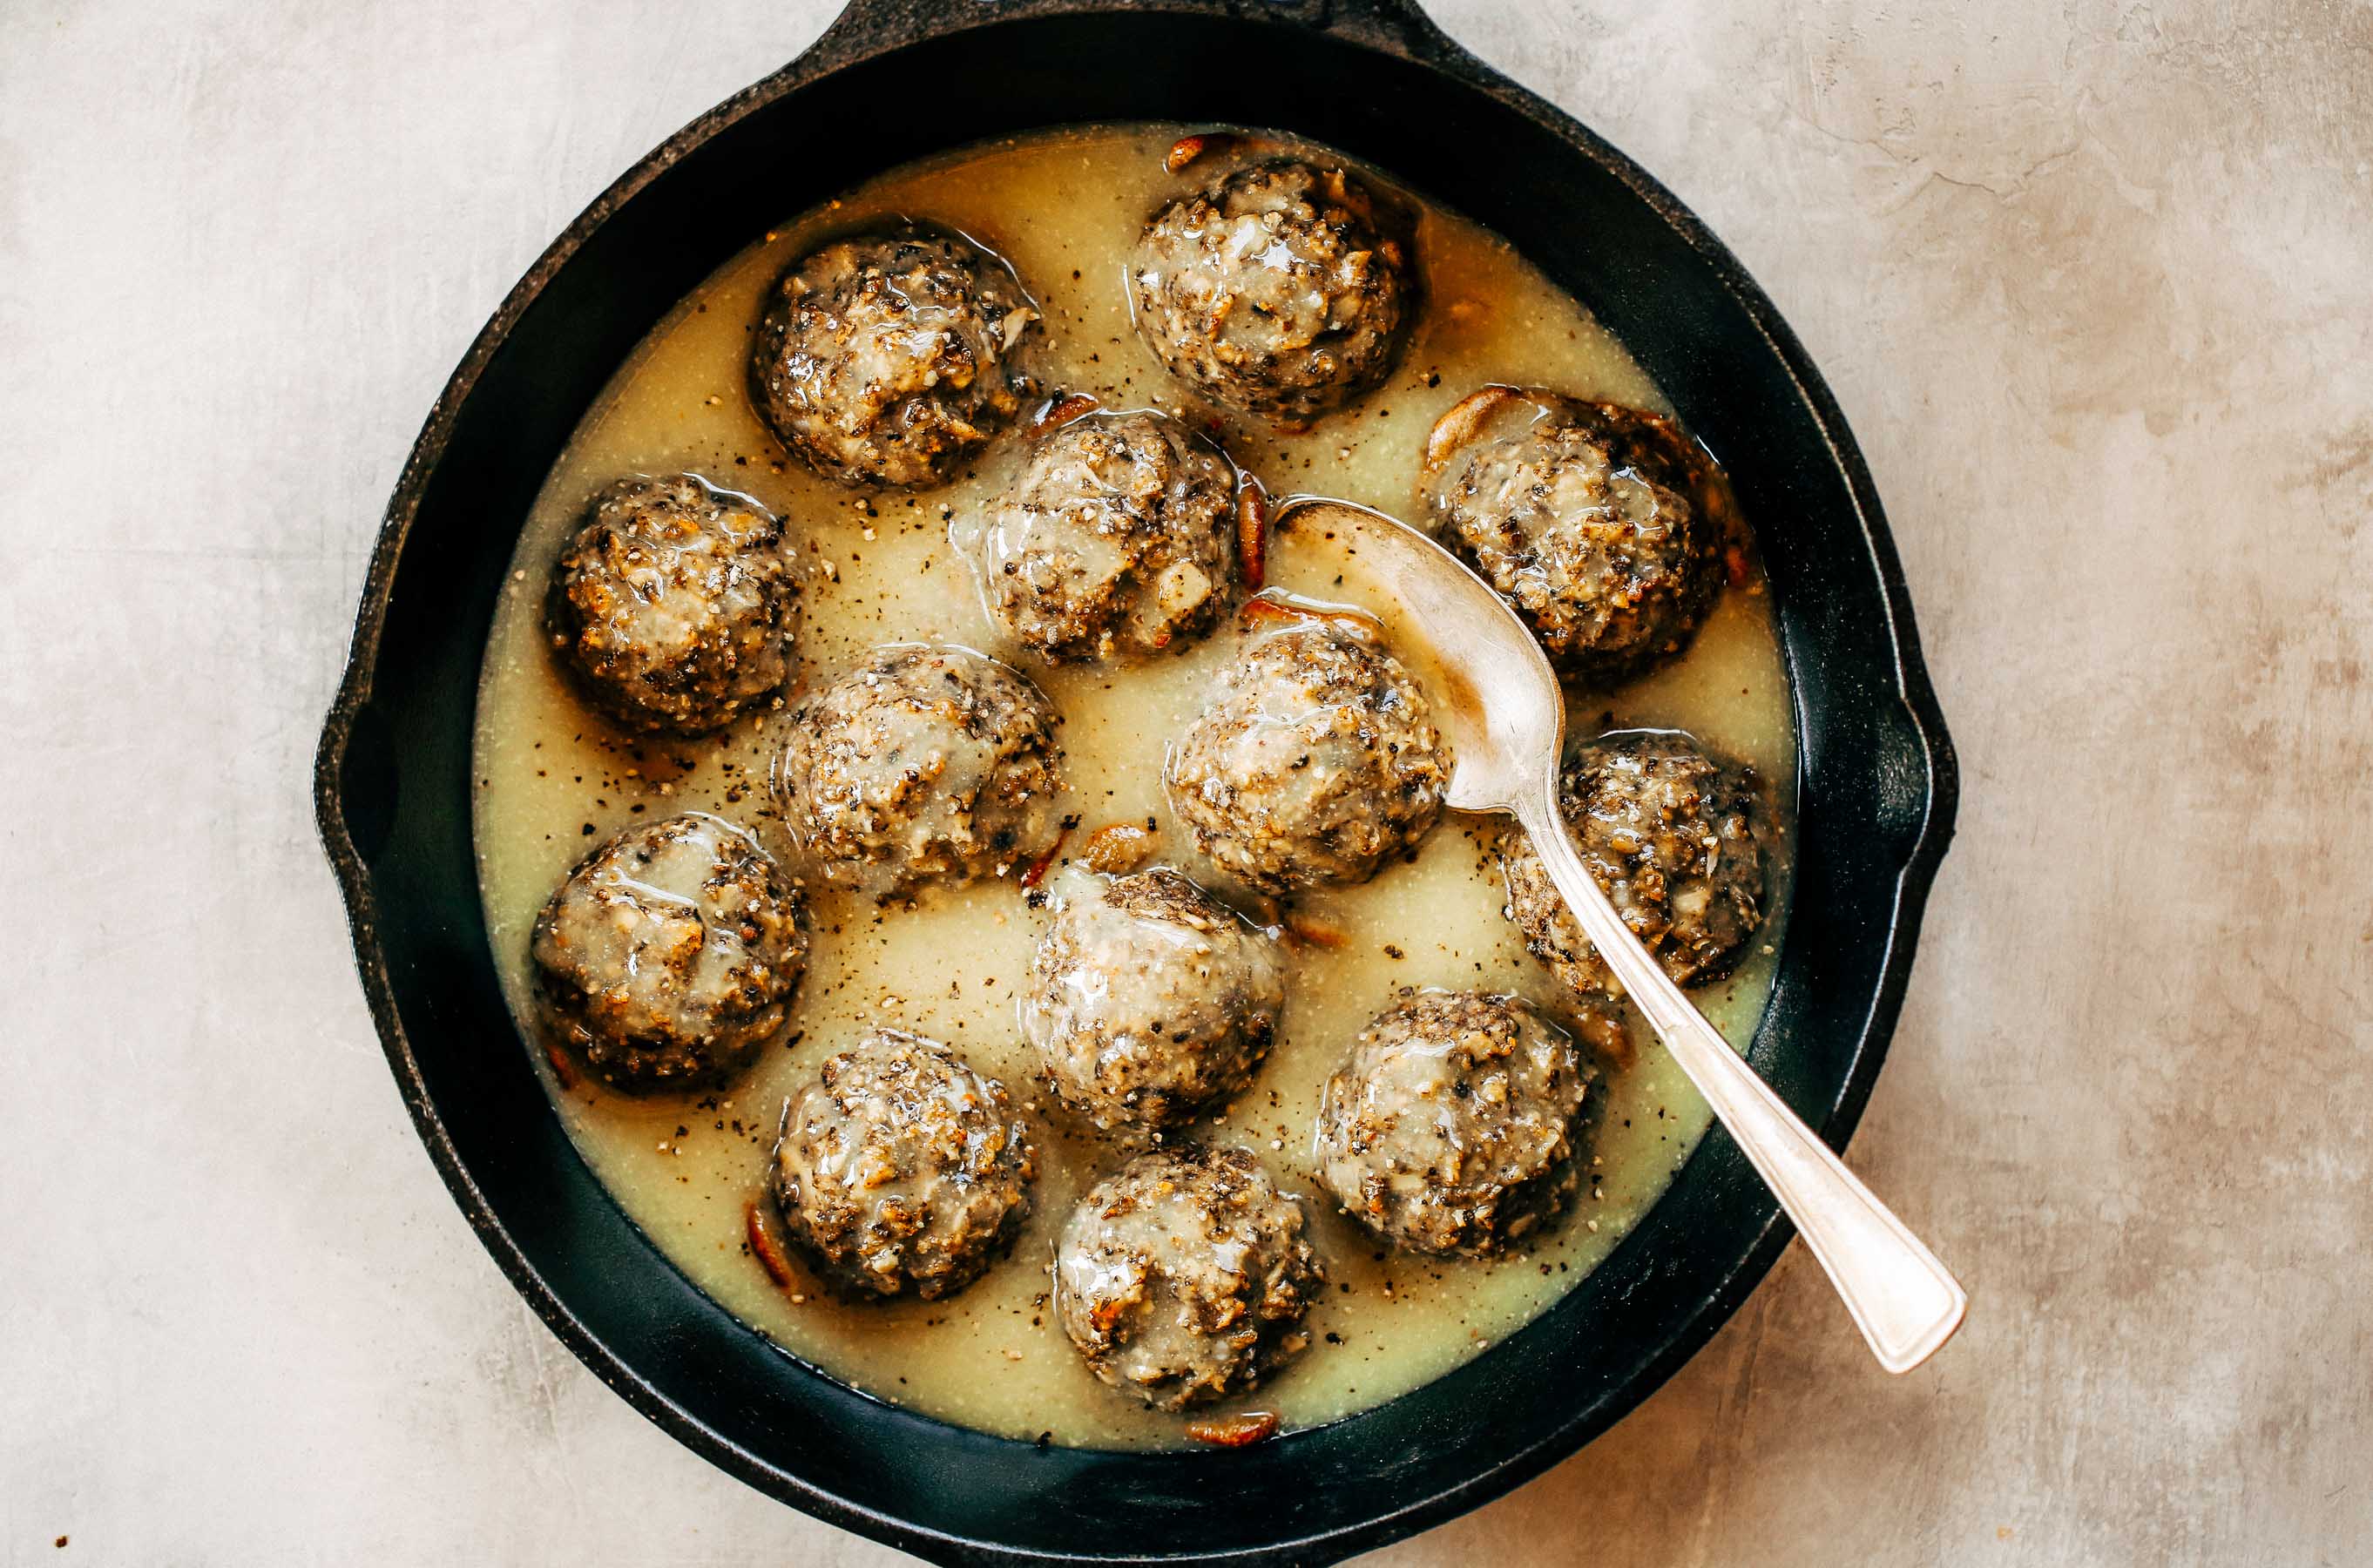 Meatless swedish meatballs made with cauliflower and white sweet potato! These are the best- served with creamy herb sauce. Paleo, dairy free, and whole30 friendly. Made in minutes in the food processor. An easy family friendly dinner recipe. Easy whole30 dinner recipes. Whole30 recipes. Whole30 lunch. Whole30 recipes just for you. Whole30 meal planning. Whole30 meal prep. Healthy paleo meals. Healthy Whole30 recipes. Easy Whole30 recipes.